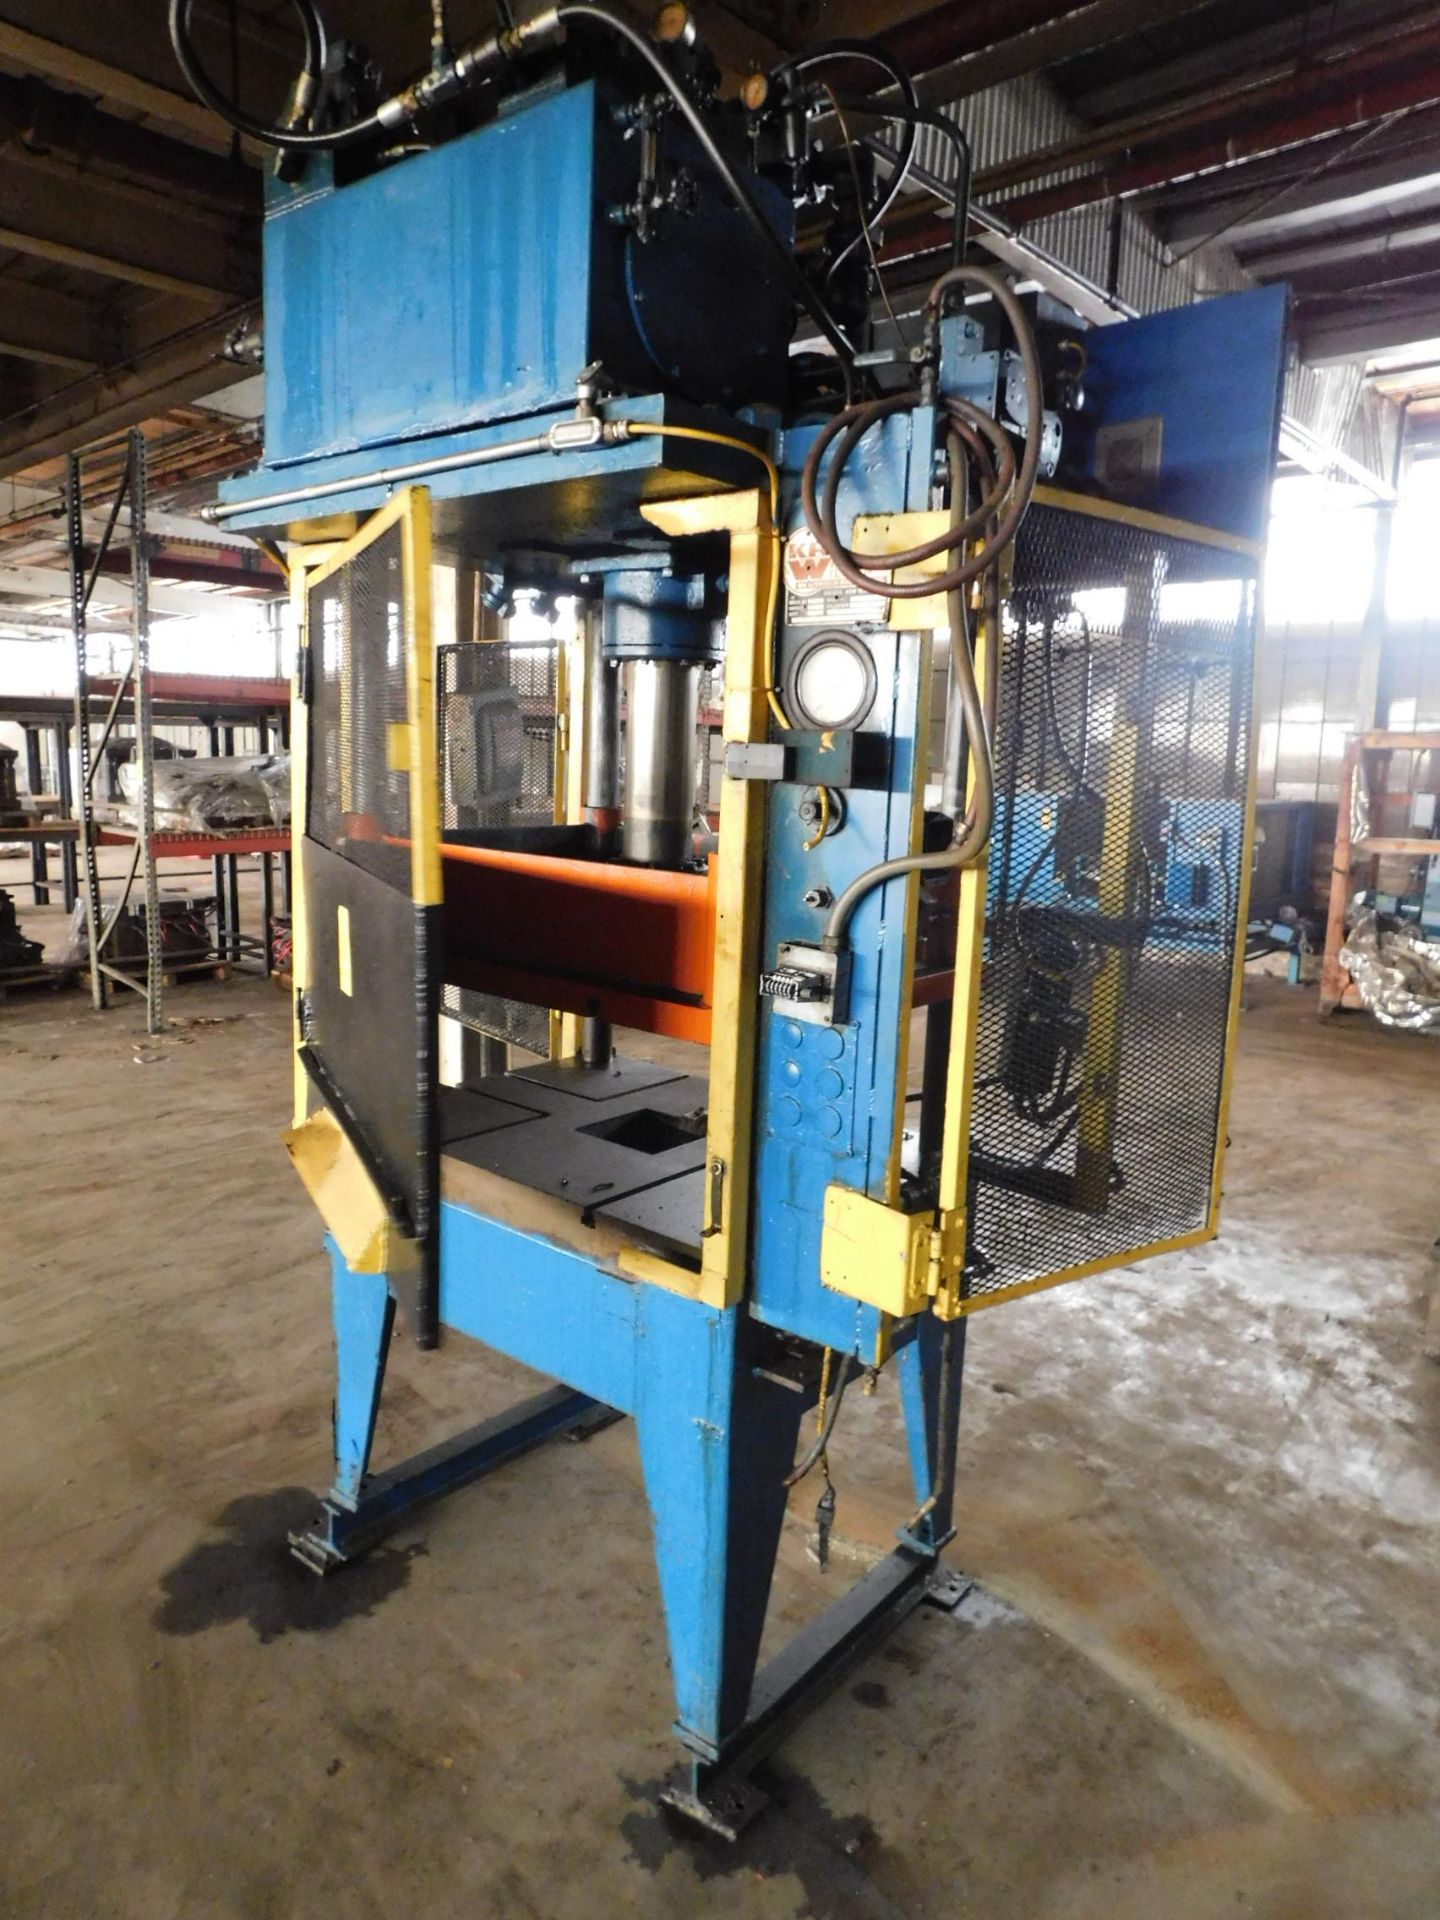 4-Post Hydraulic Press, 32" X 44" Bed and Ram, Approx. 12" Stroke, 13" Daylight with Ram Down - Image 2 of 6